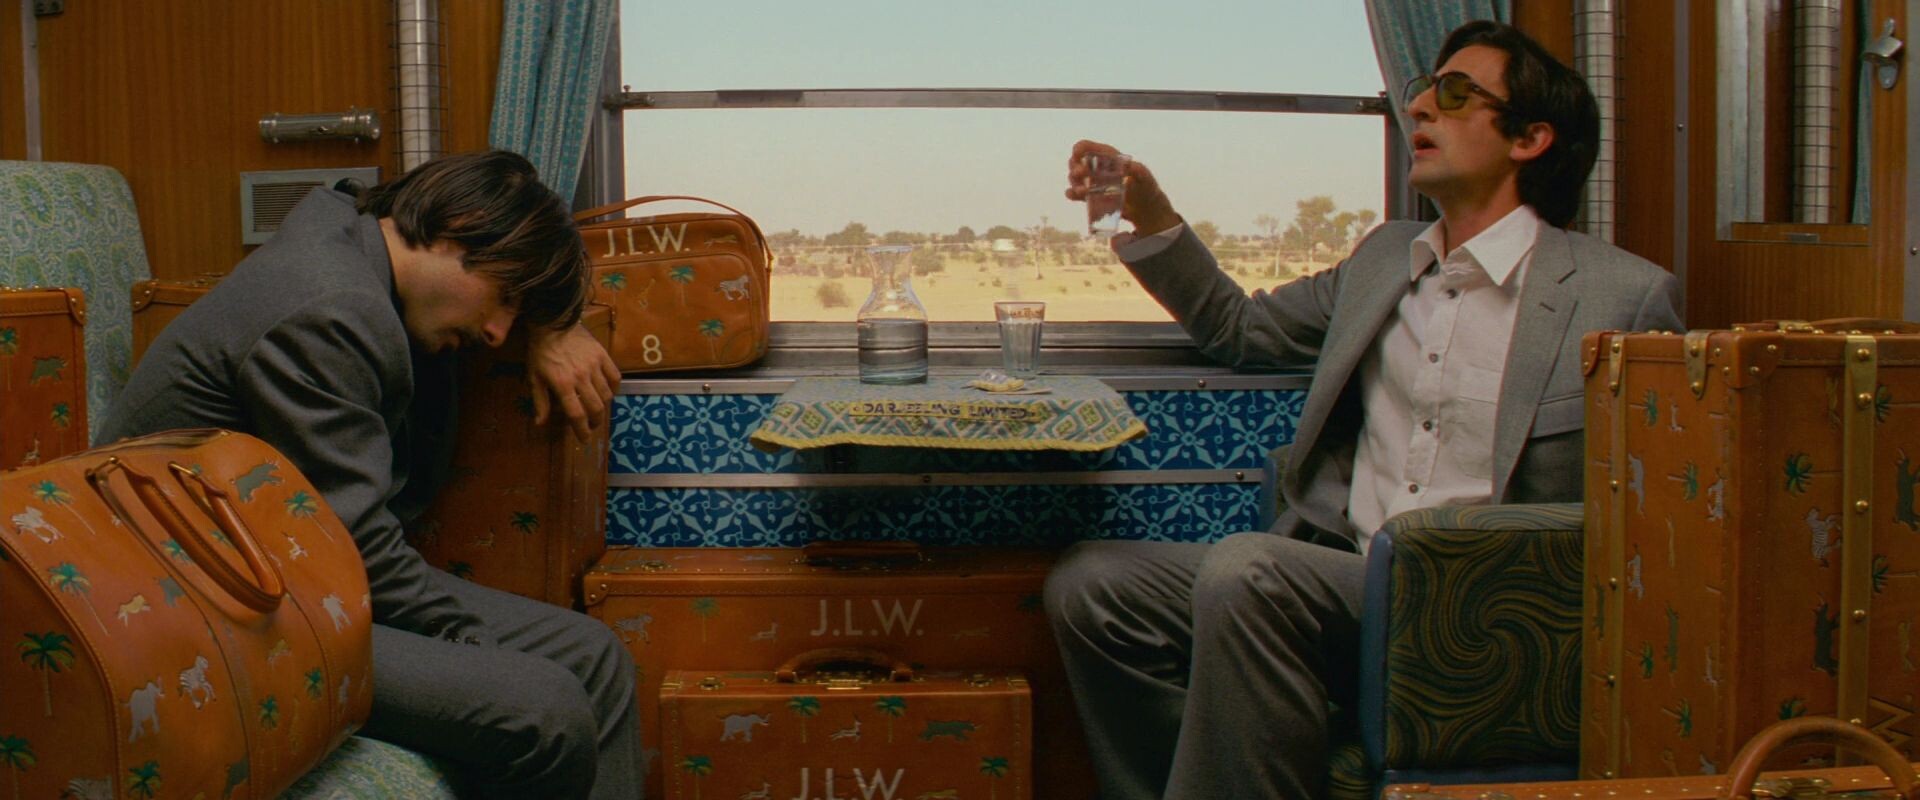 luggage from darjeeling limited, Fantastic suitcases in The Darjeeling  Limited #movie #fact #suitcase #